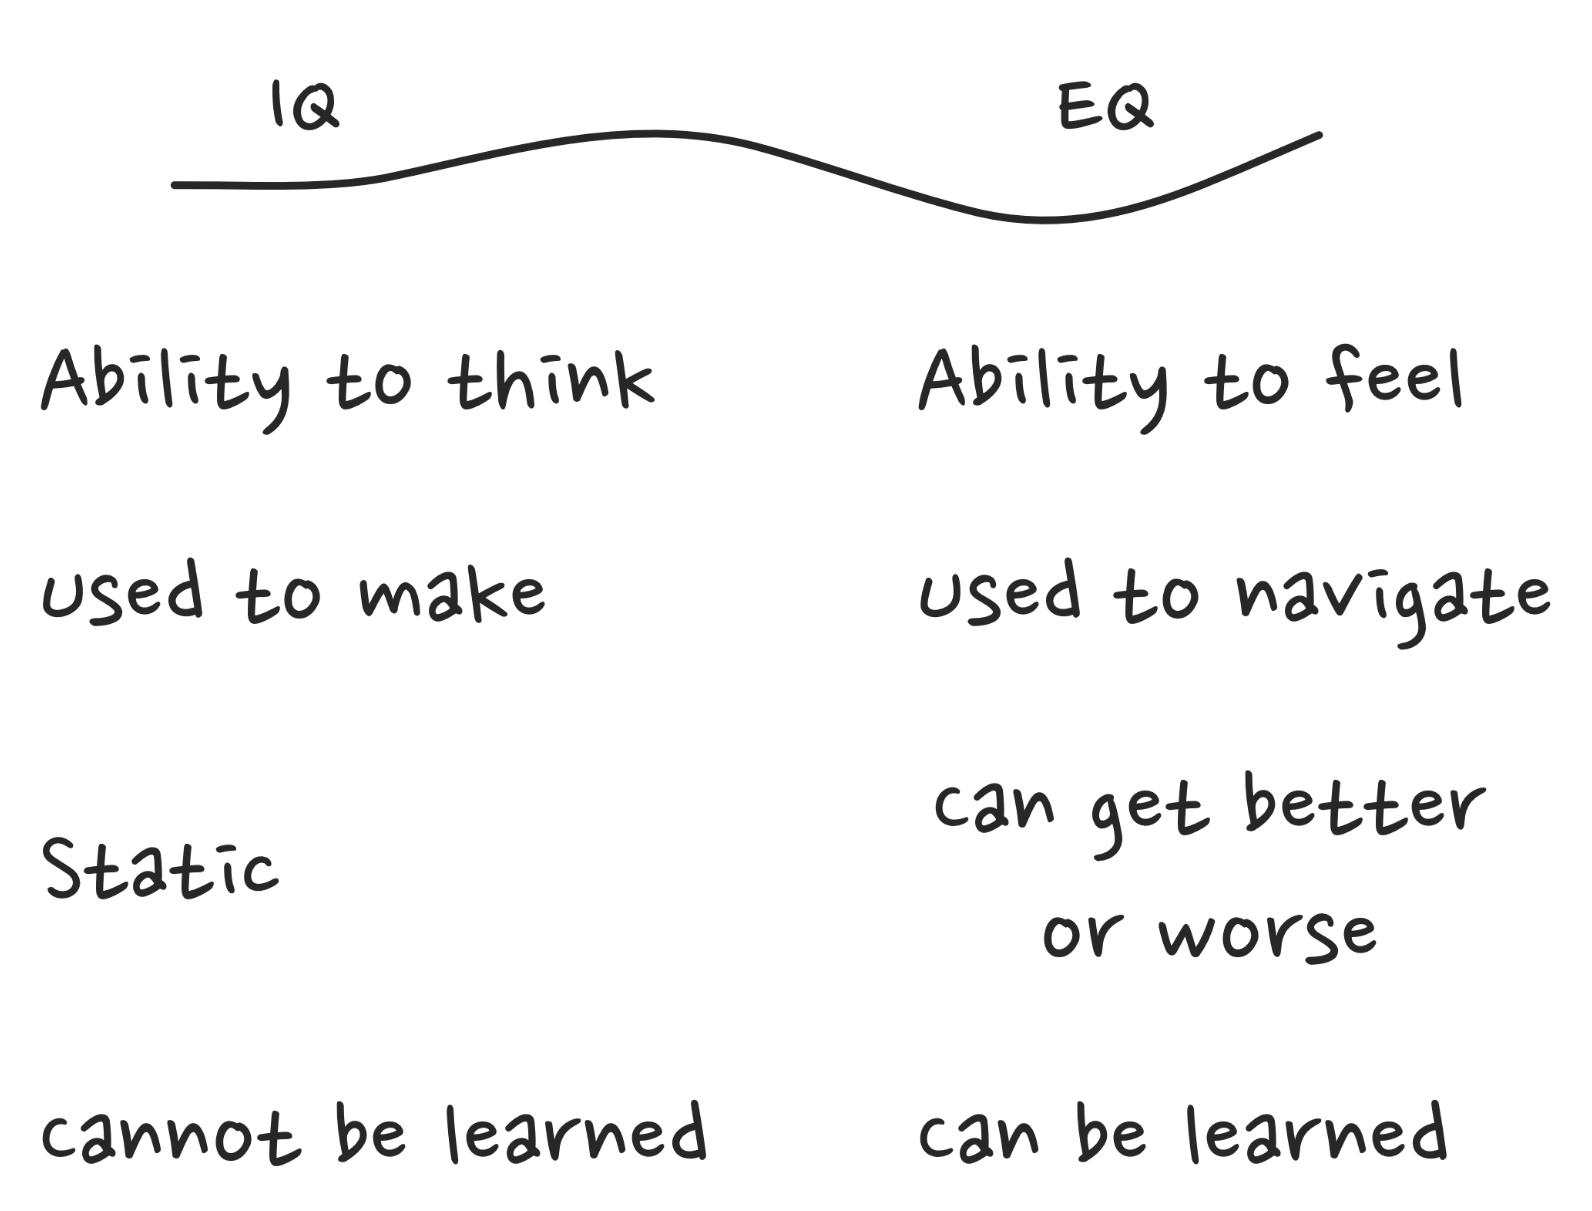 EQ from the perspective of a software engineer